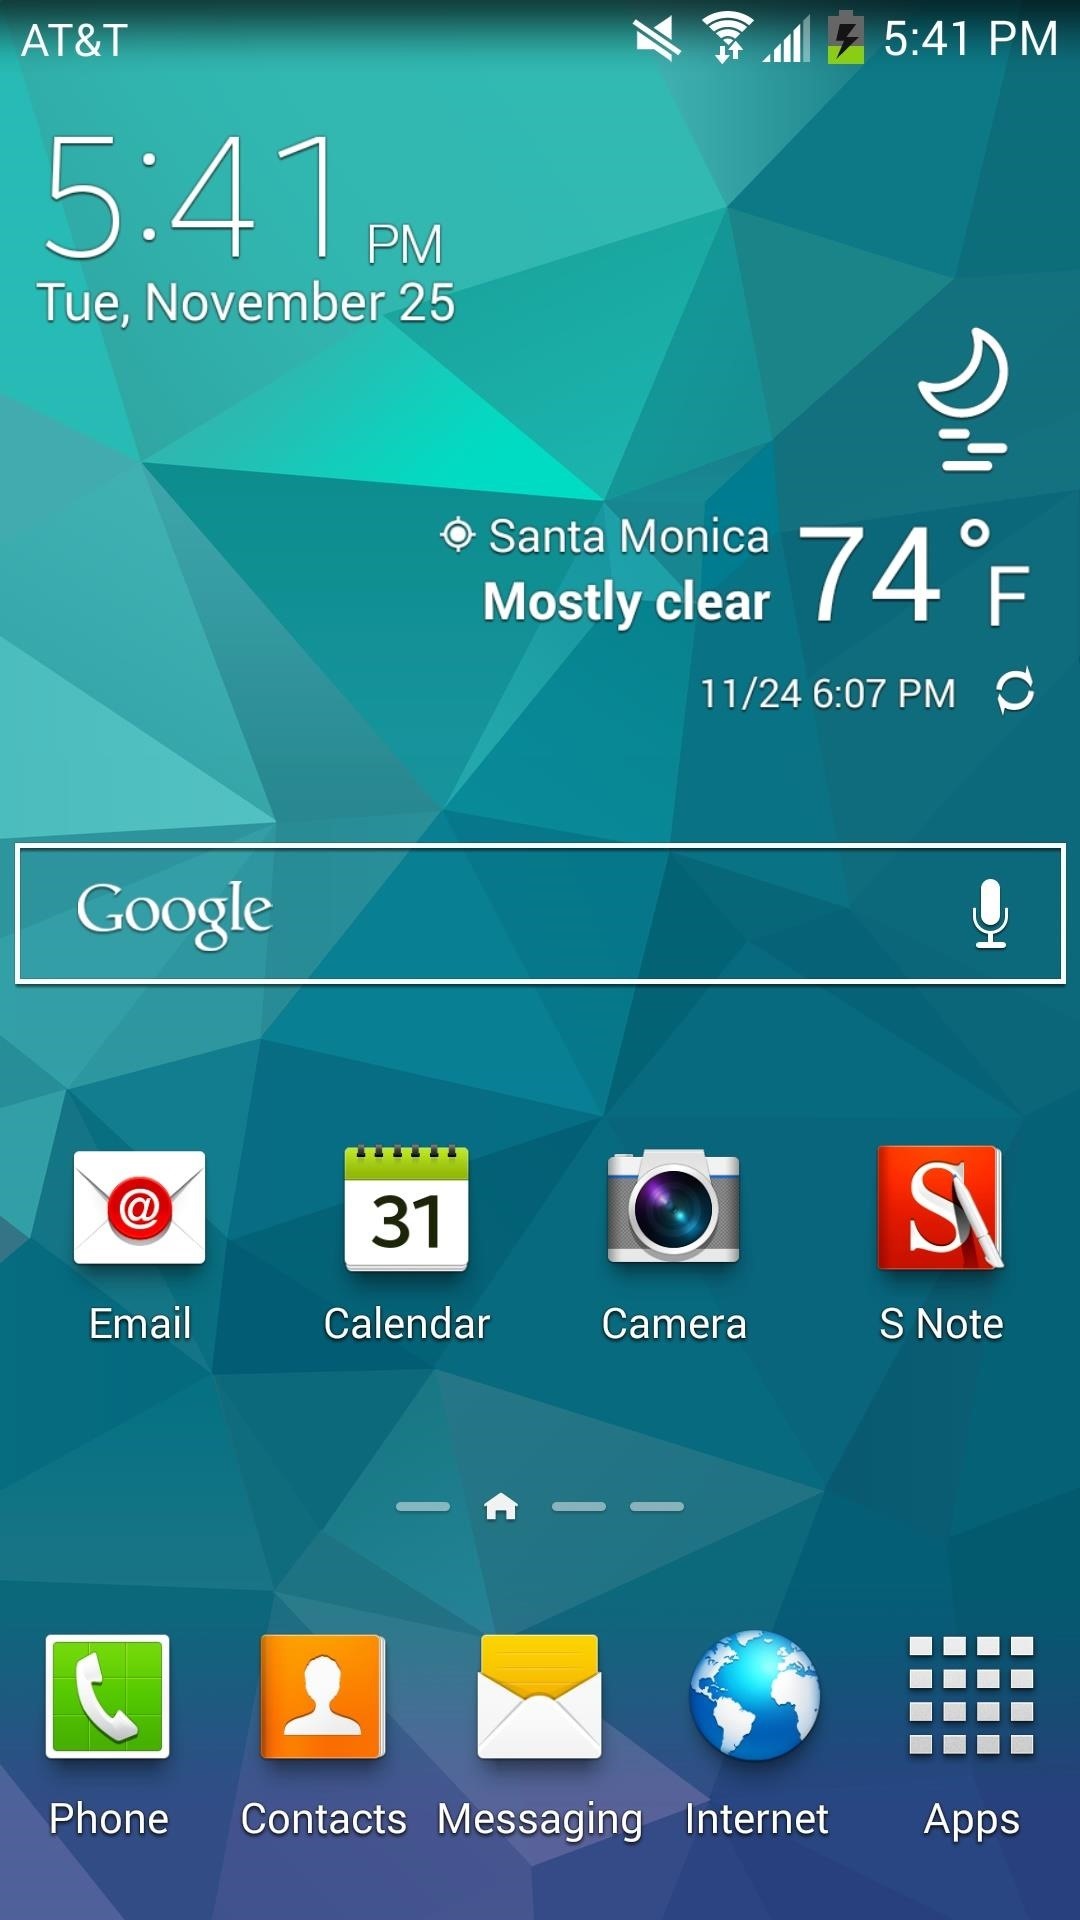 Make the AccuWeather Widget Transparent on Your Samsung Galaxy Note 3